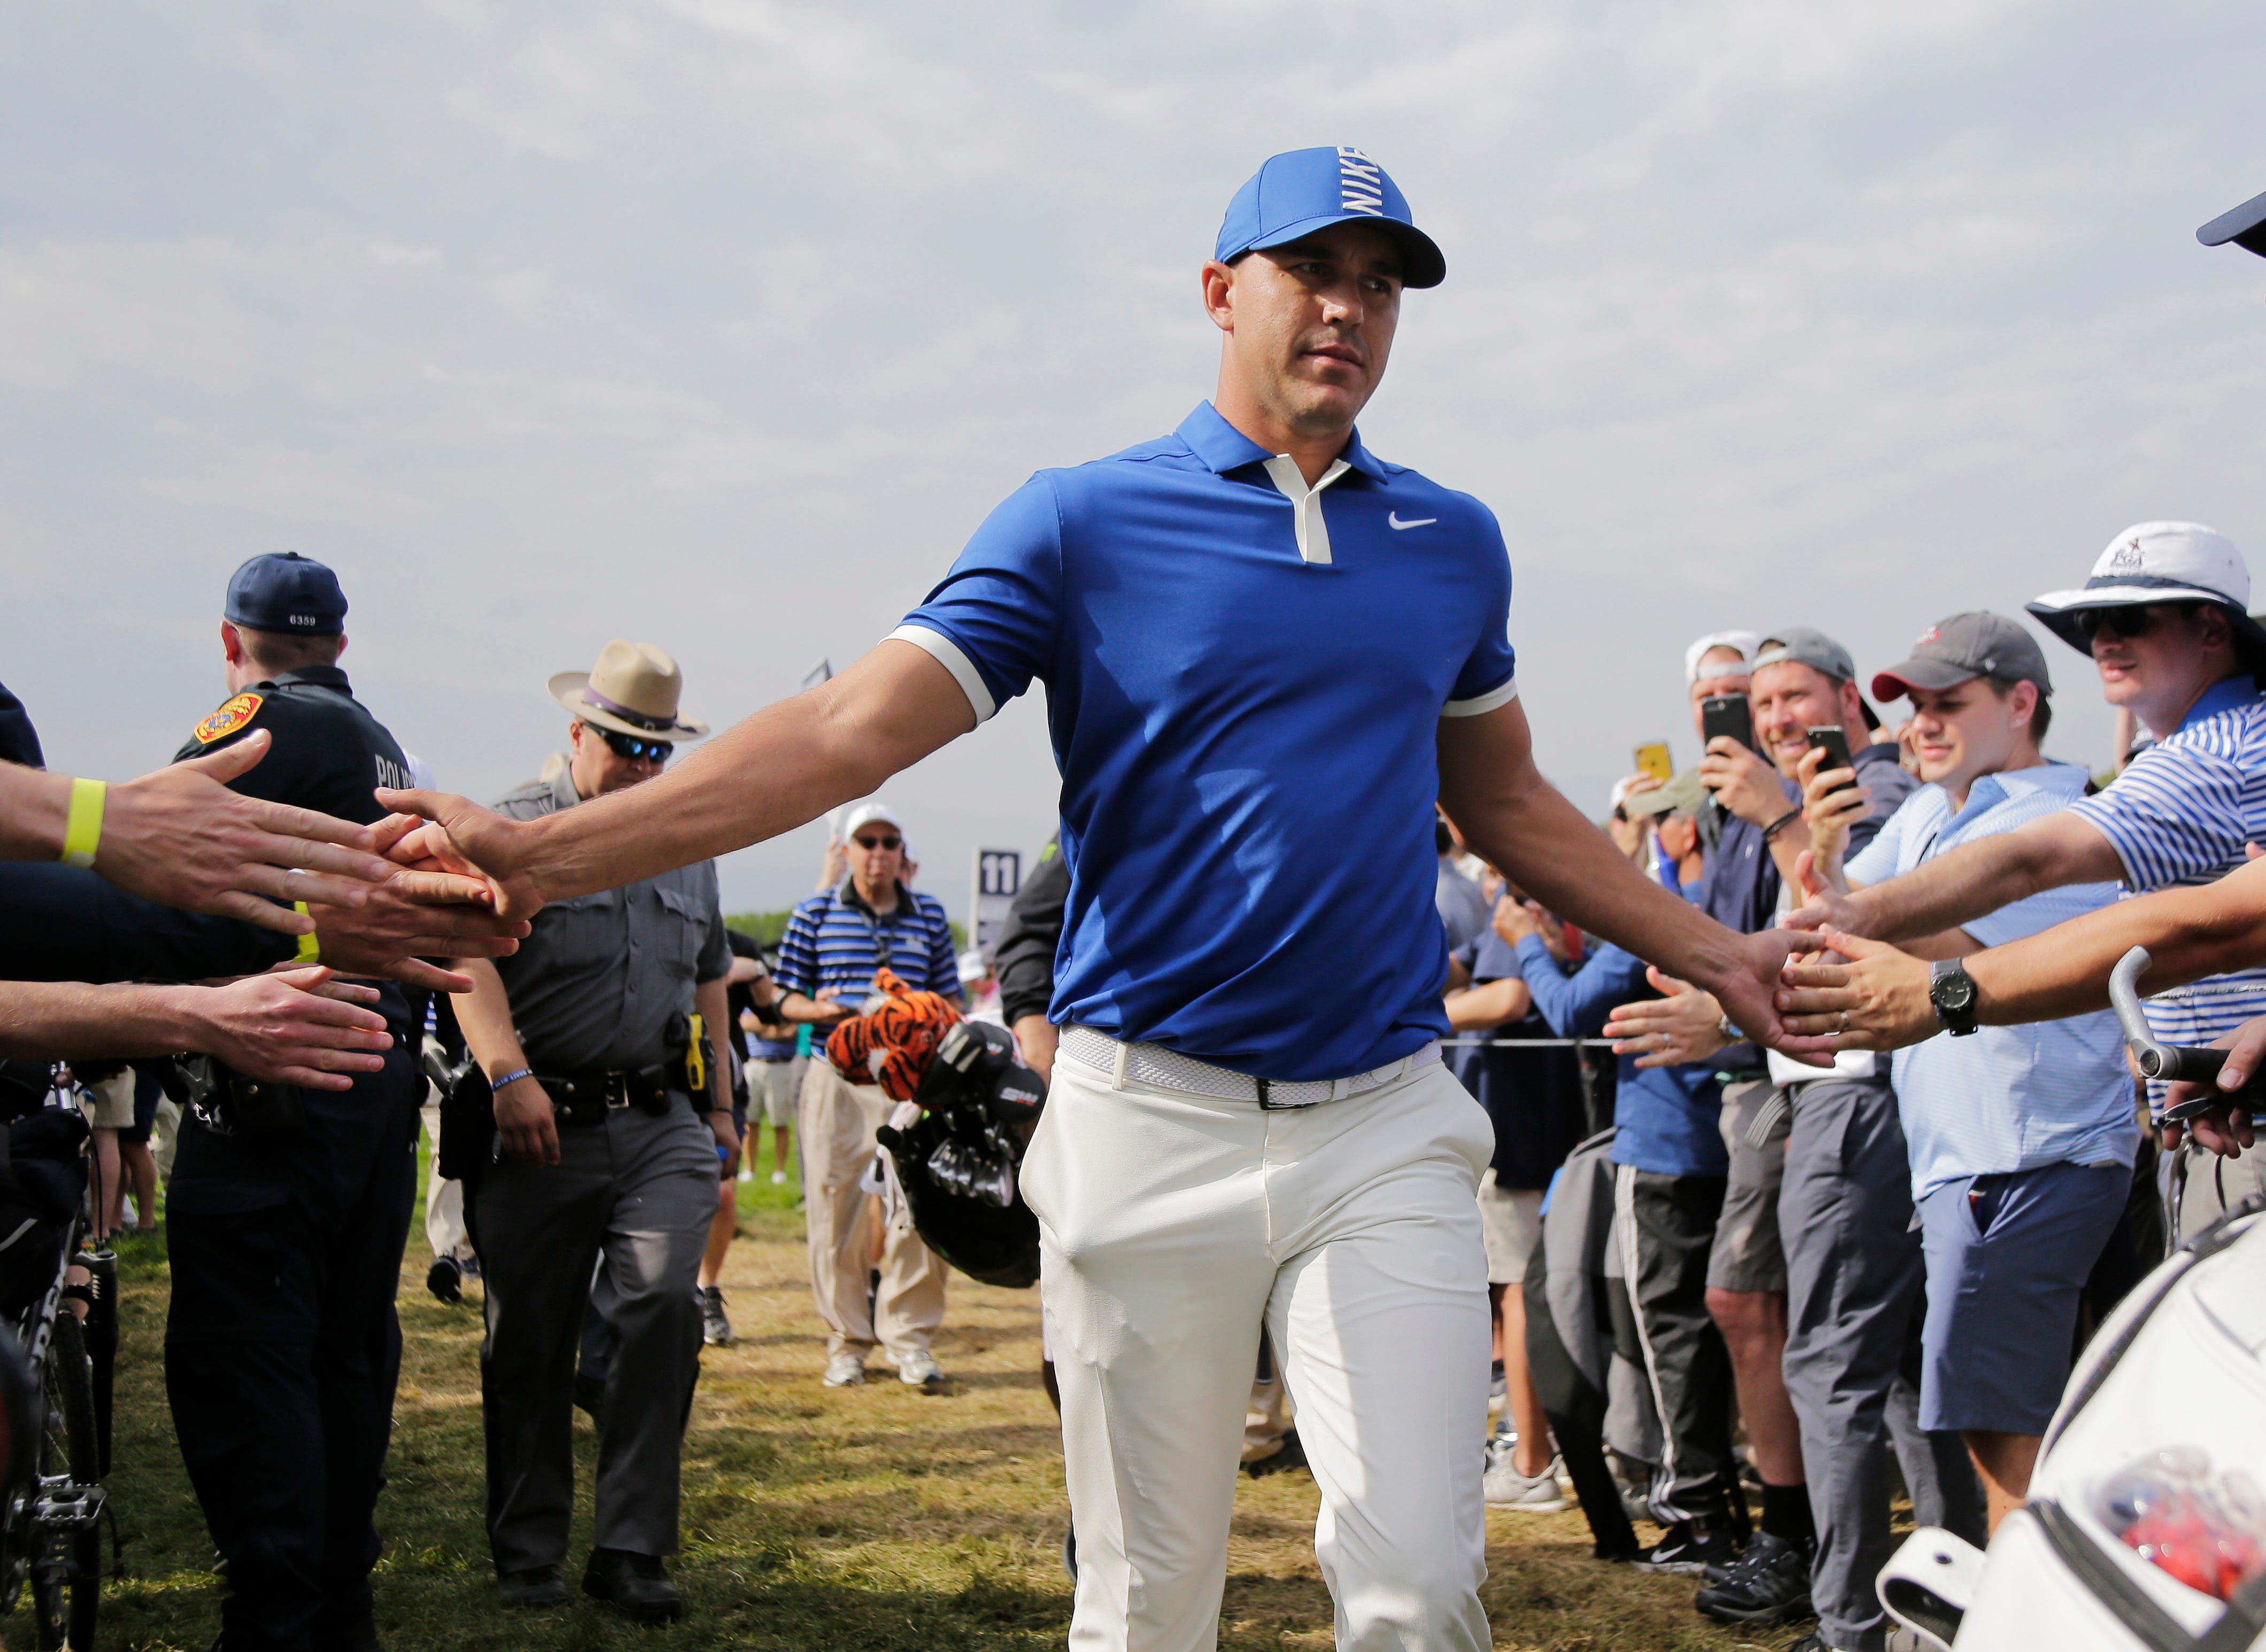 Brooks Koepka greets spectators as he walks to the 12th tee during the second round of the PGA Championship on Friday.